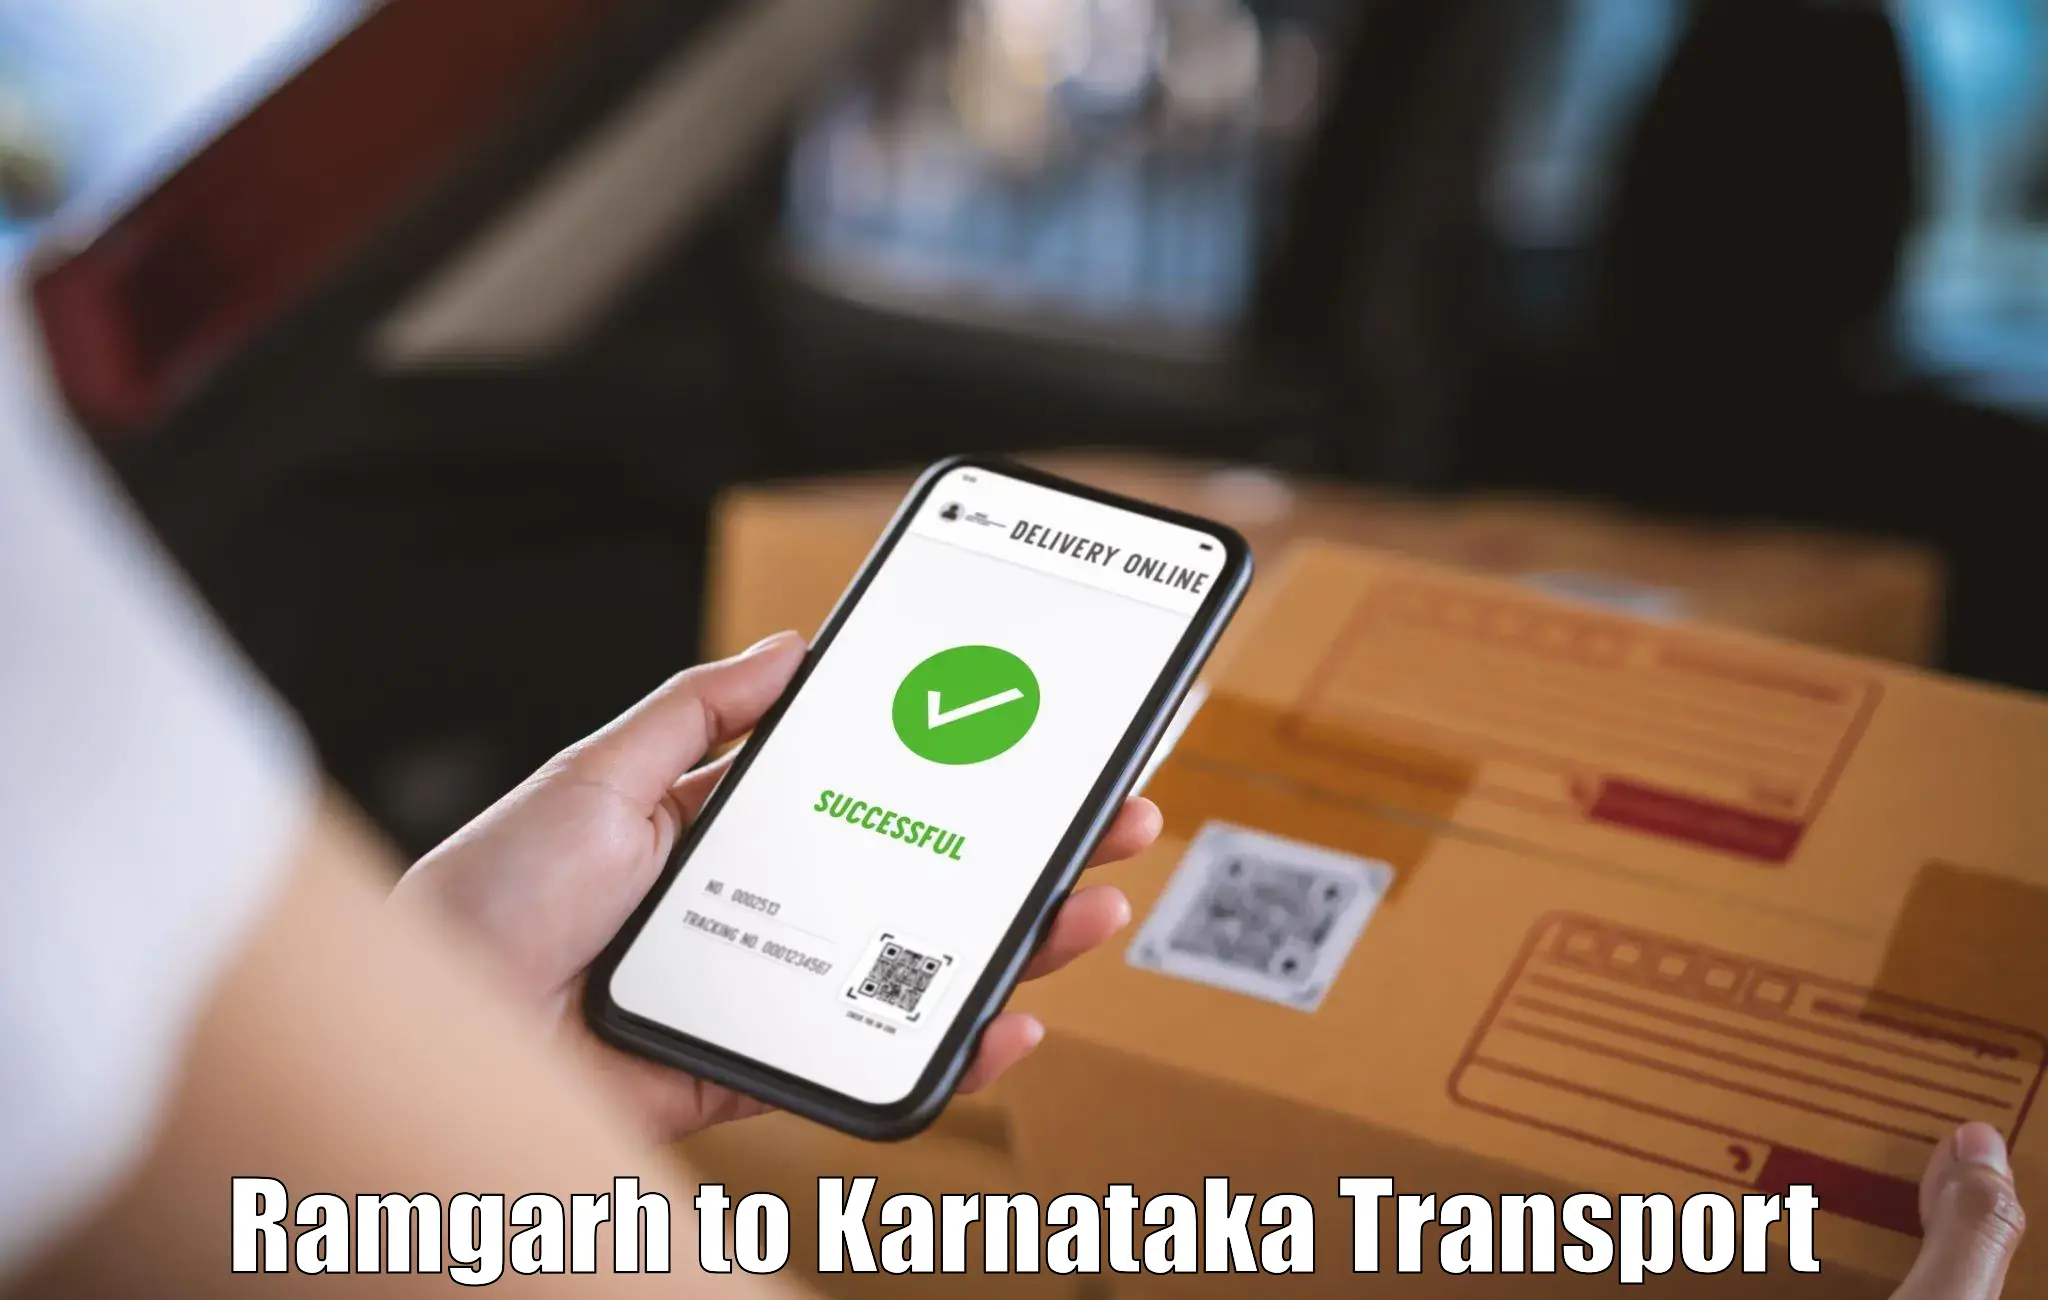 Vehicle parcel service Ramgarh to Indian Institute of Science Bangalore